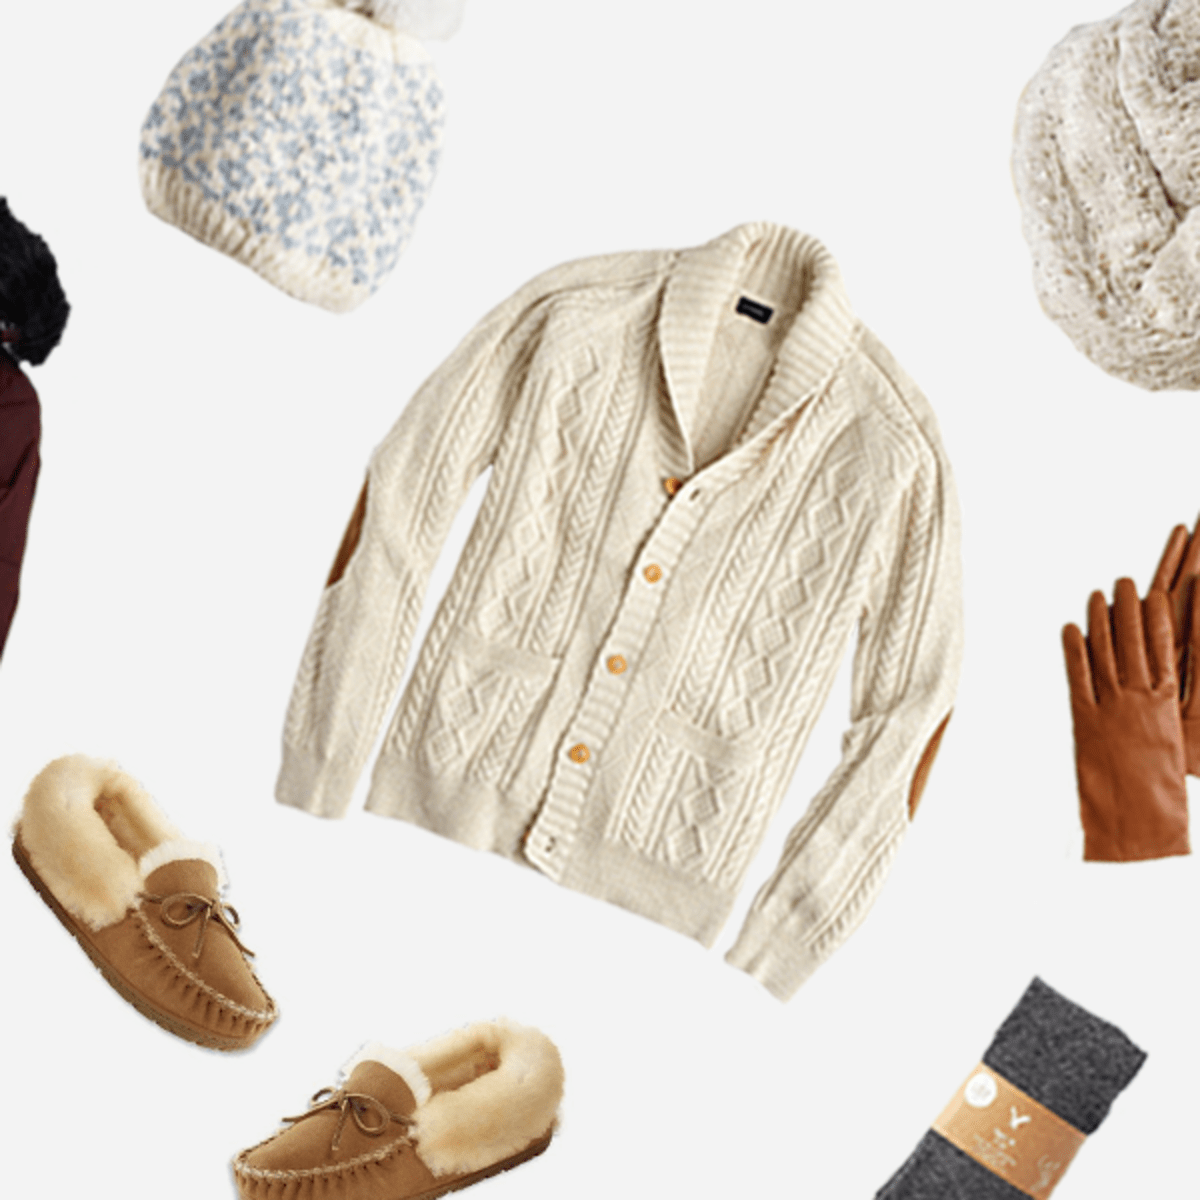 These Cozy Cold-Weather Essentials Will Make You Excited for Winter - Verily